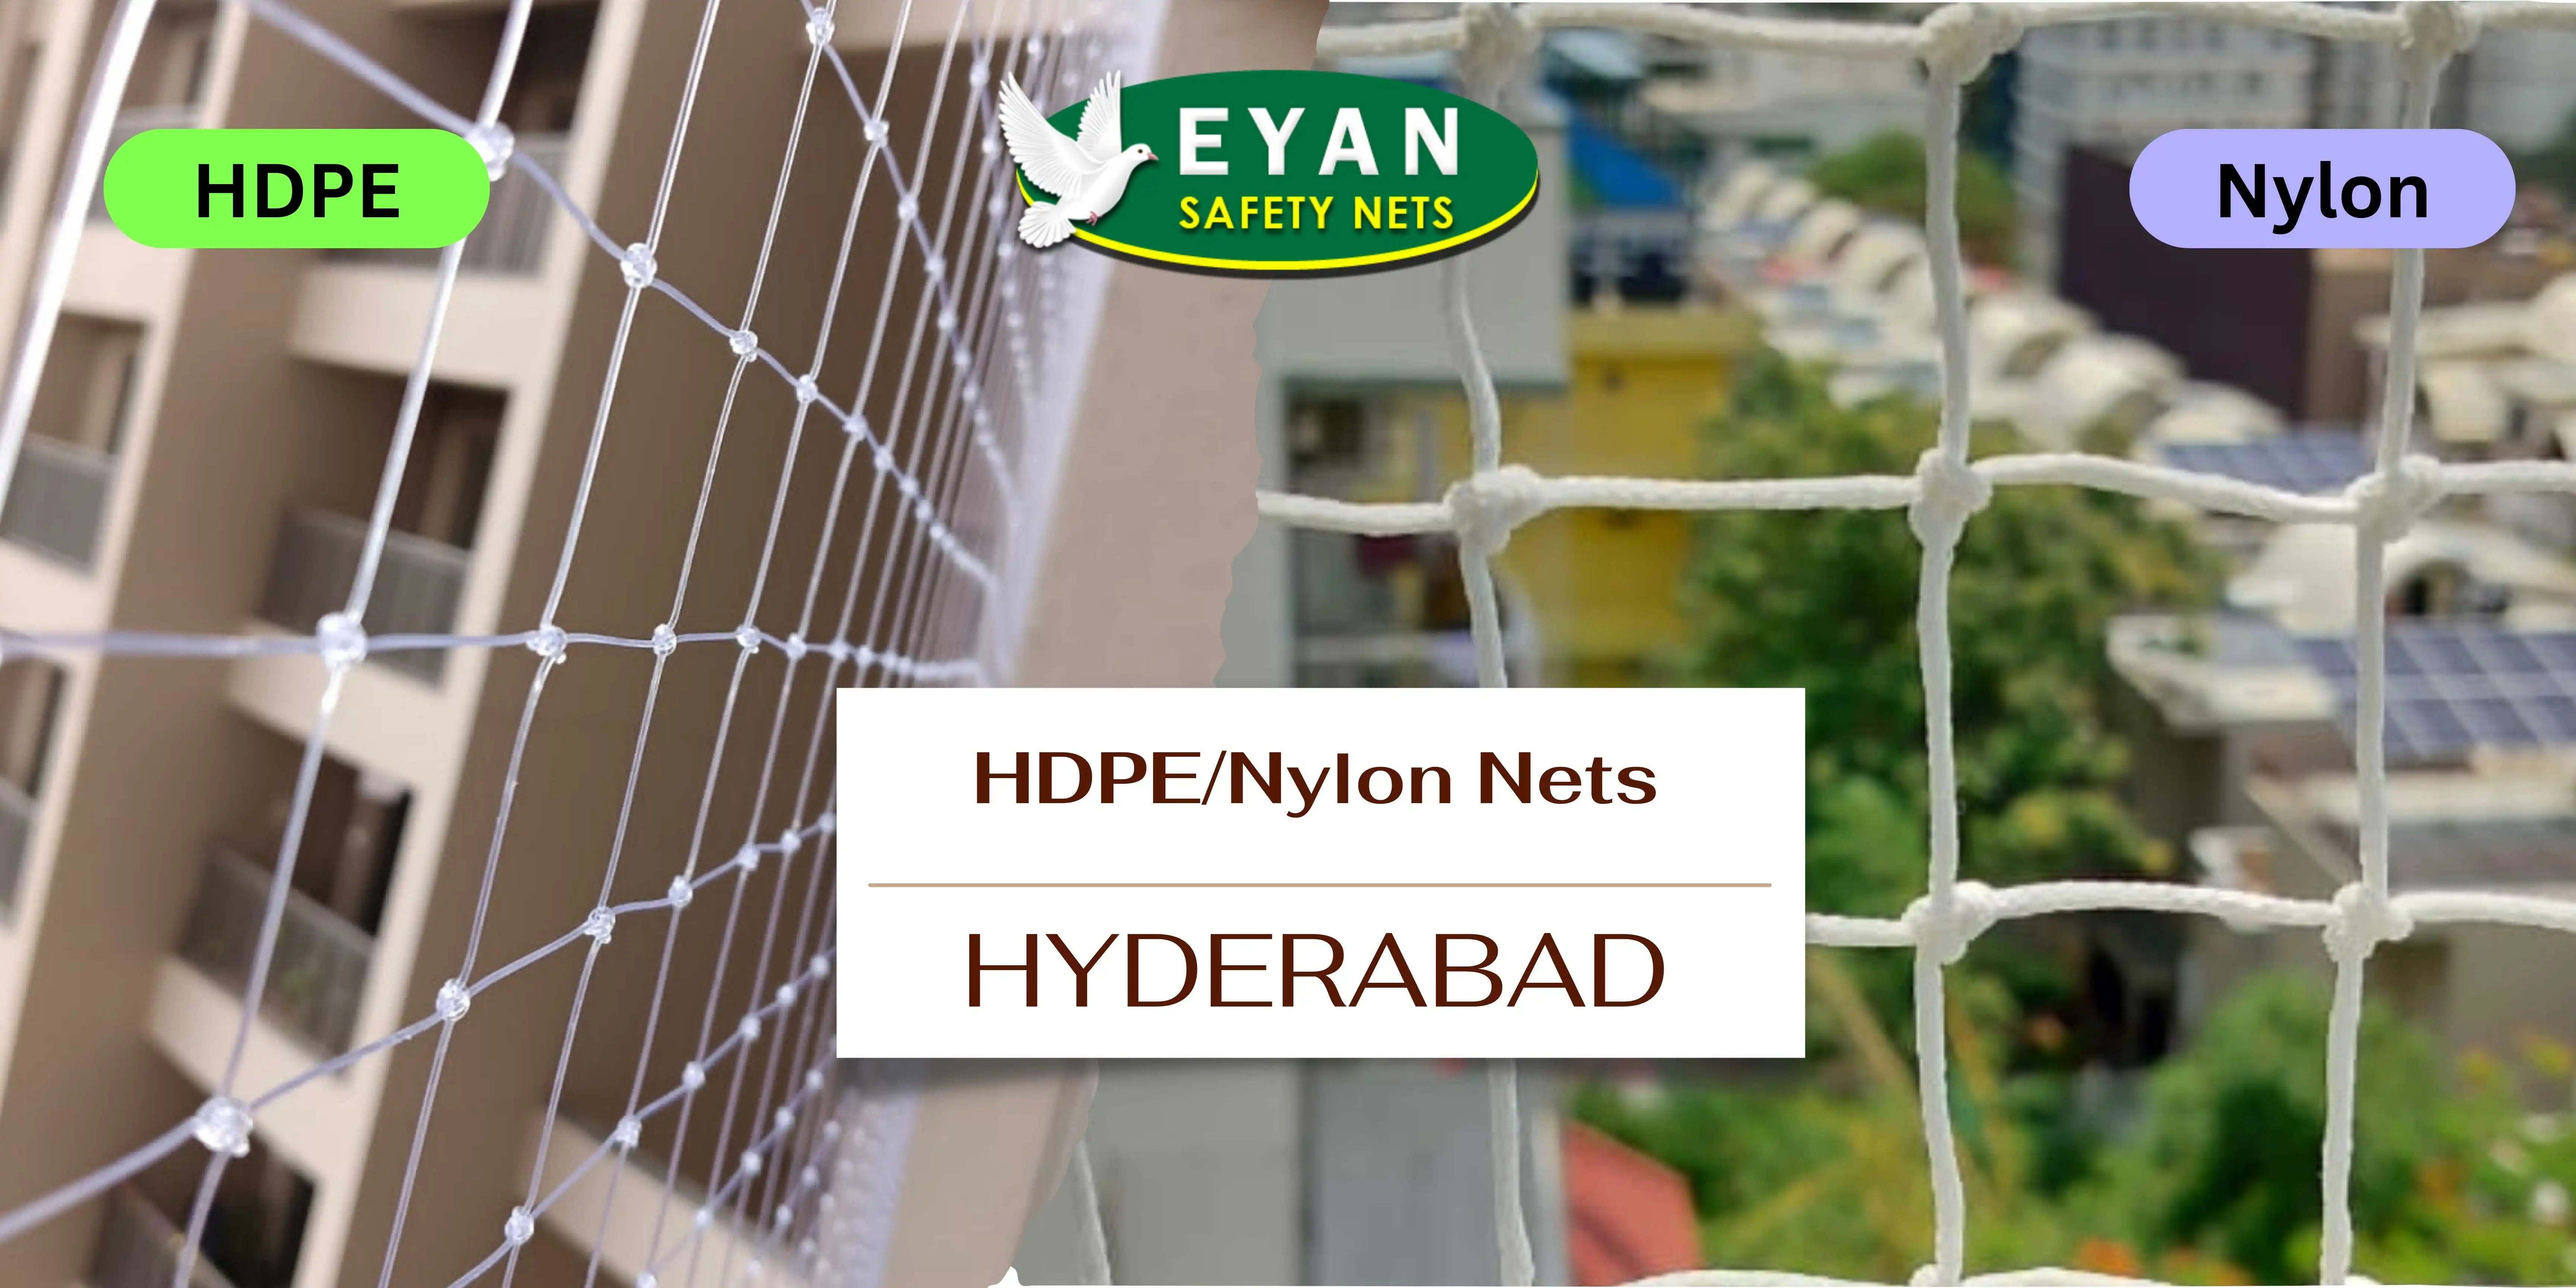 close up image of HDPE and Nylon Net materials